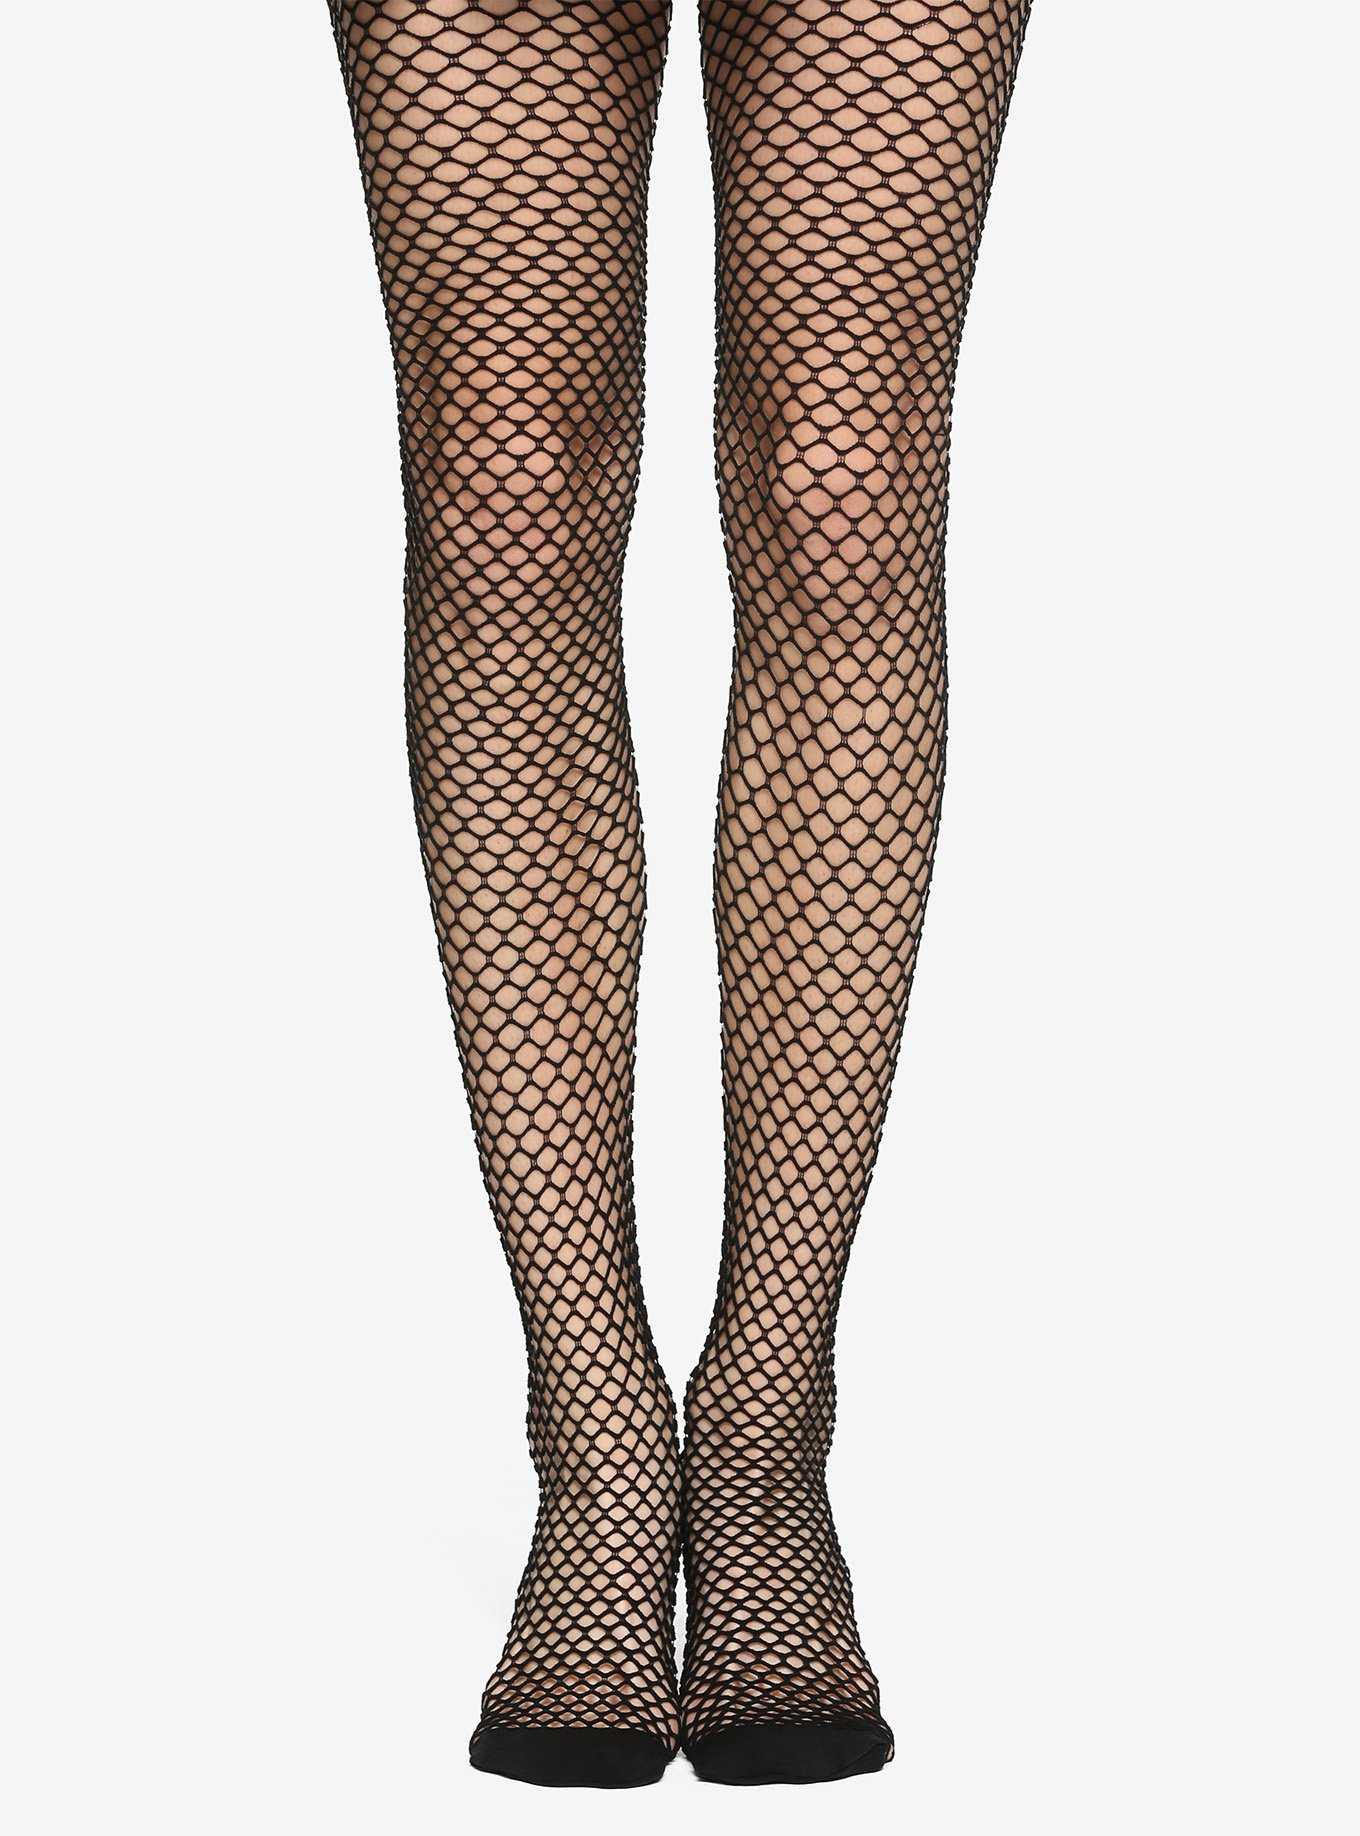 Hot Topic: North Riverside Park - We have some new cute tights and thigh  highs in stock now 💕